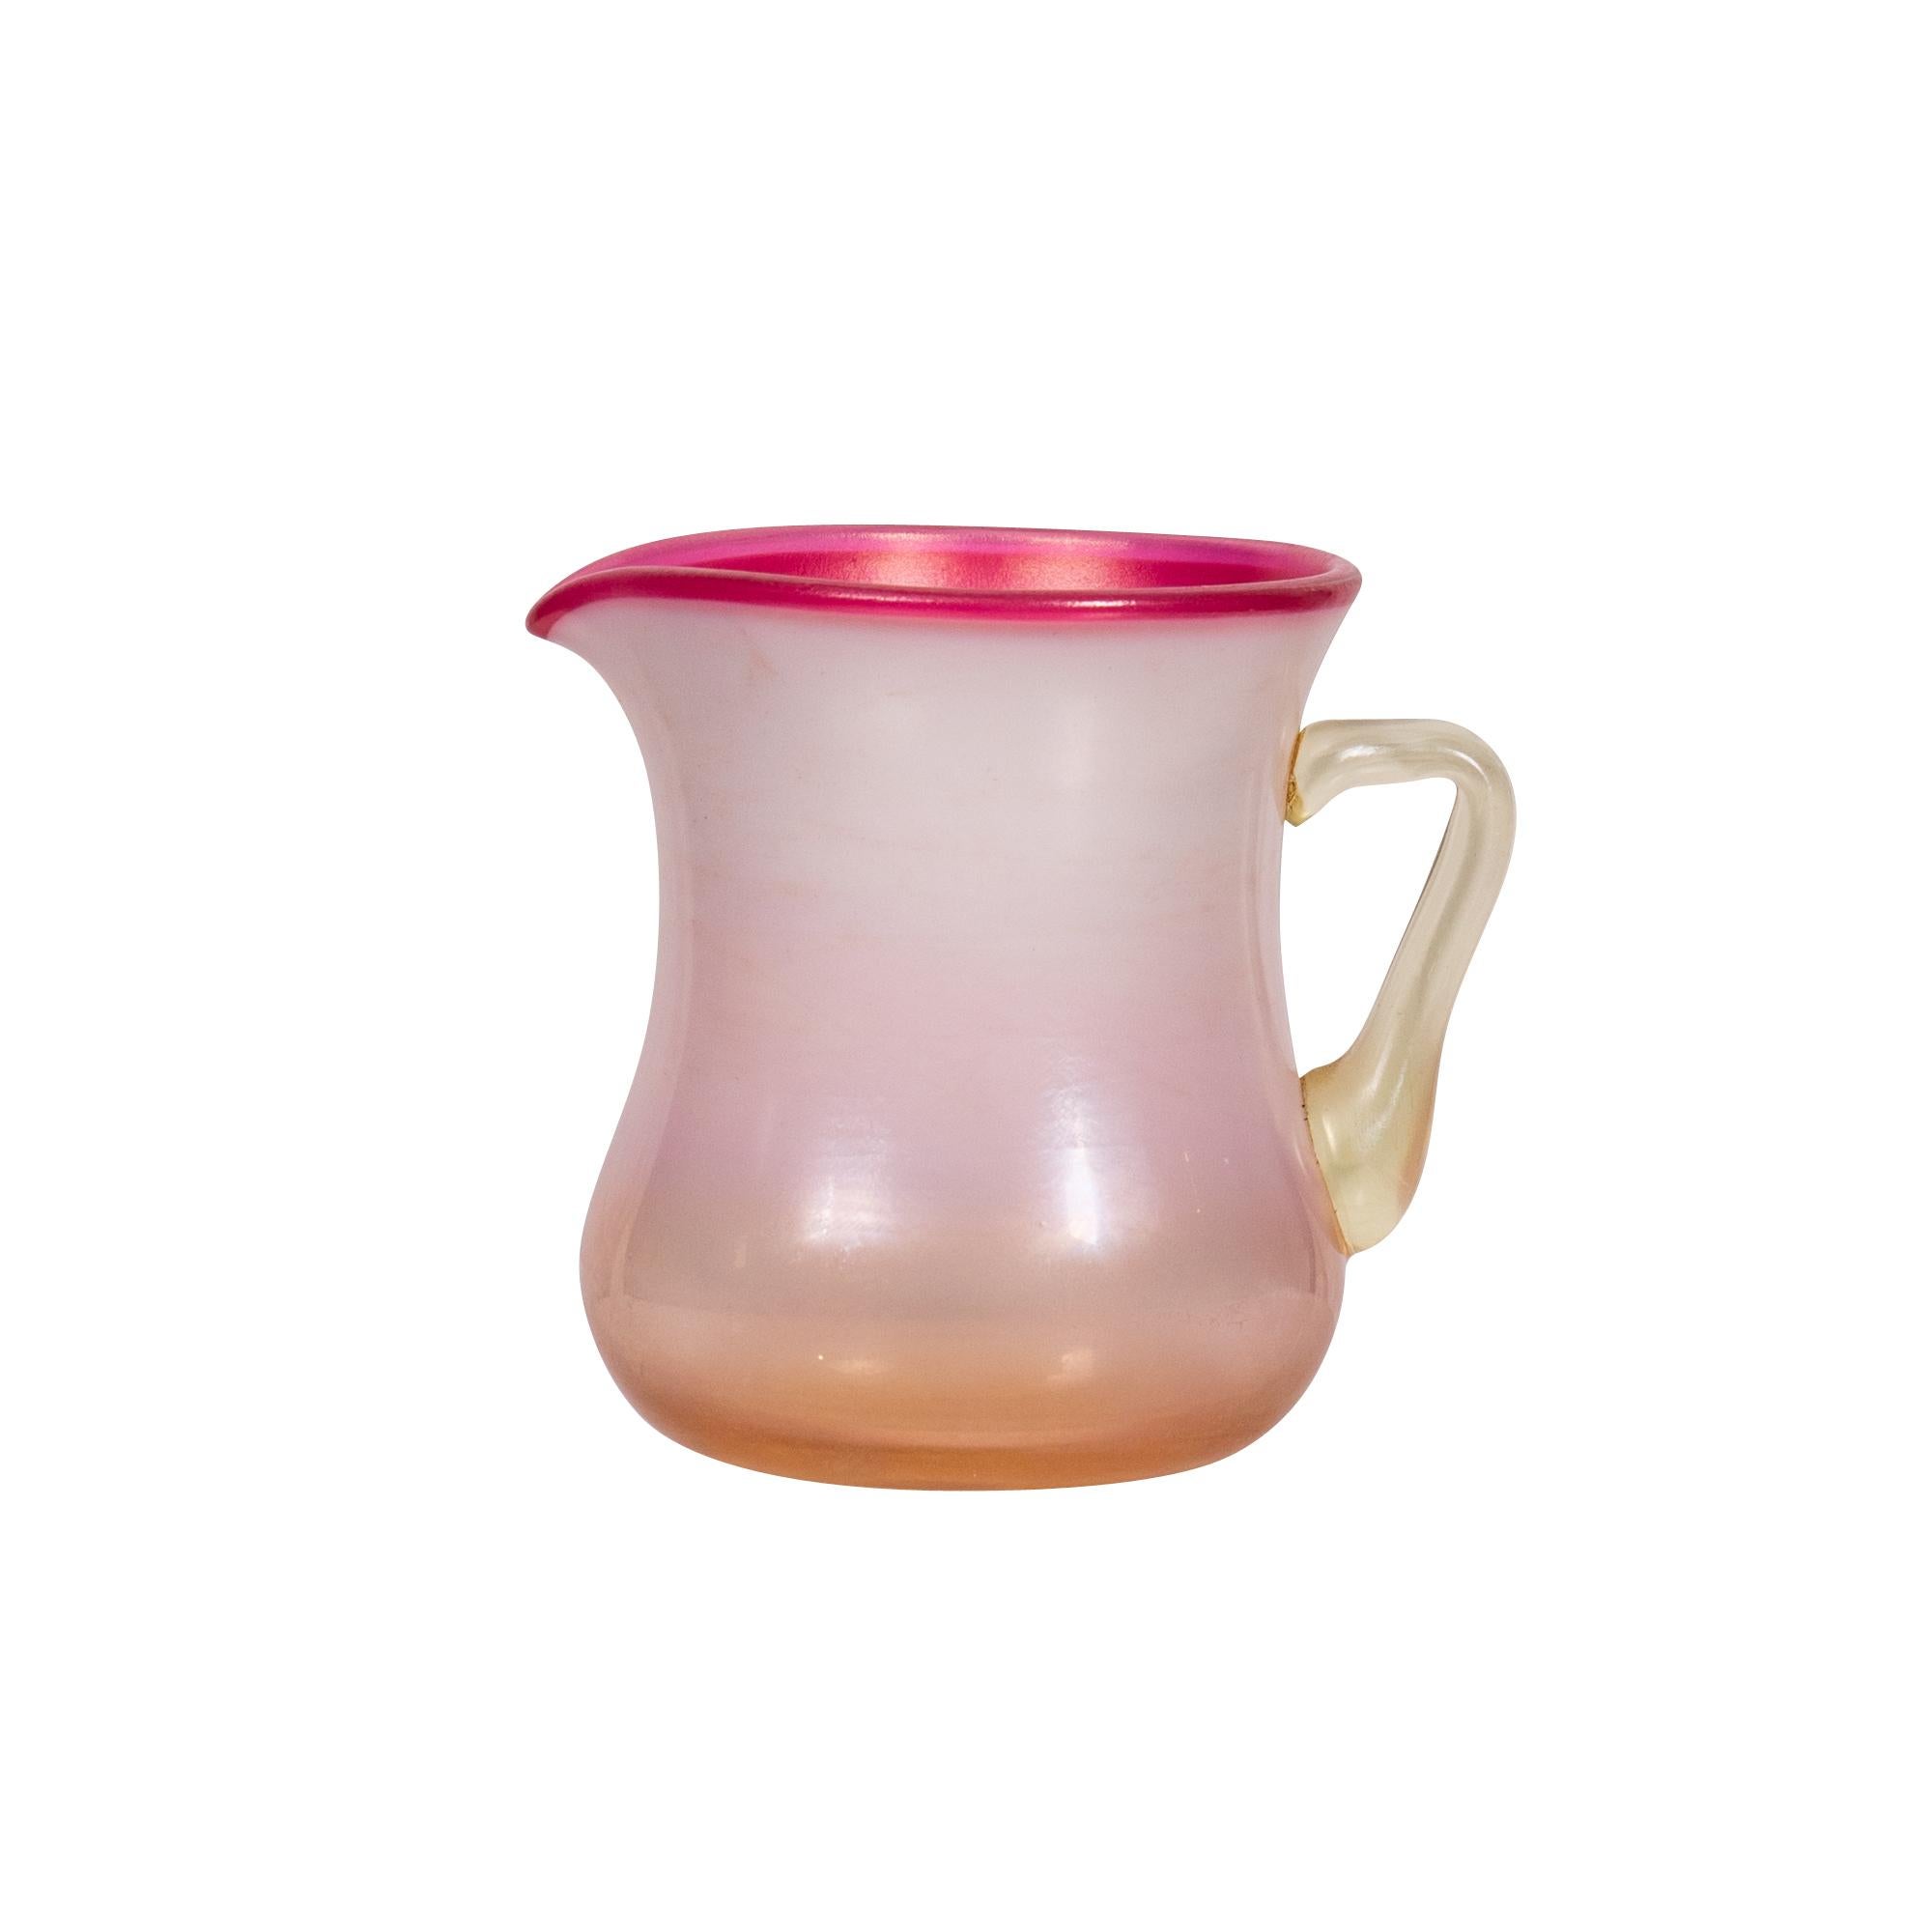 Tiffany Studios
iridescent pink favrile glass small pitcher
circa 1910
engraved 1582 L.C. Tiffany-Favrile
Height 3 1/8 in. (7.8 cm.)
Shipping
Free Shipping Express to Continental US, arrives in 5 to 6 days.
Literature
Alastair Duncan, Louis